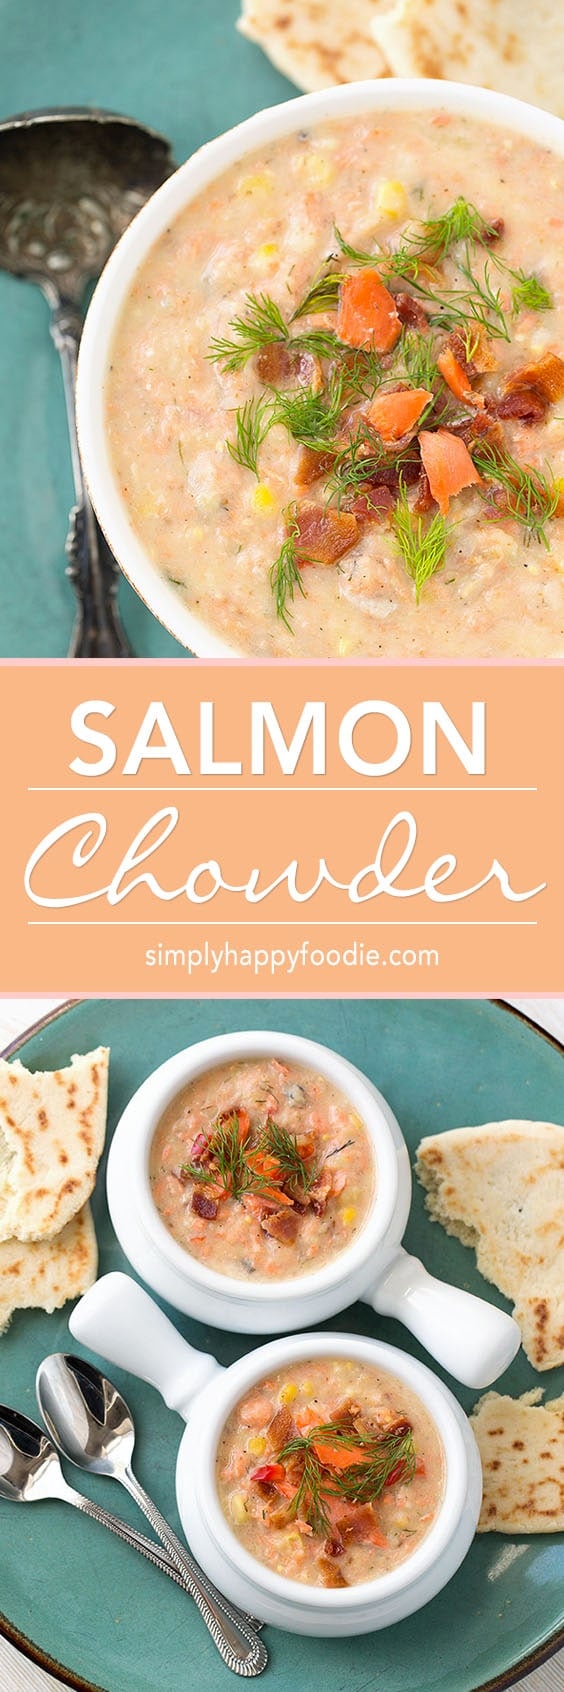 Tasty Salmon Chowder is perfect for using leftover salmon. simplyhappyfoodie.com